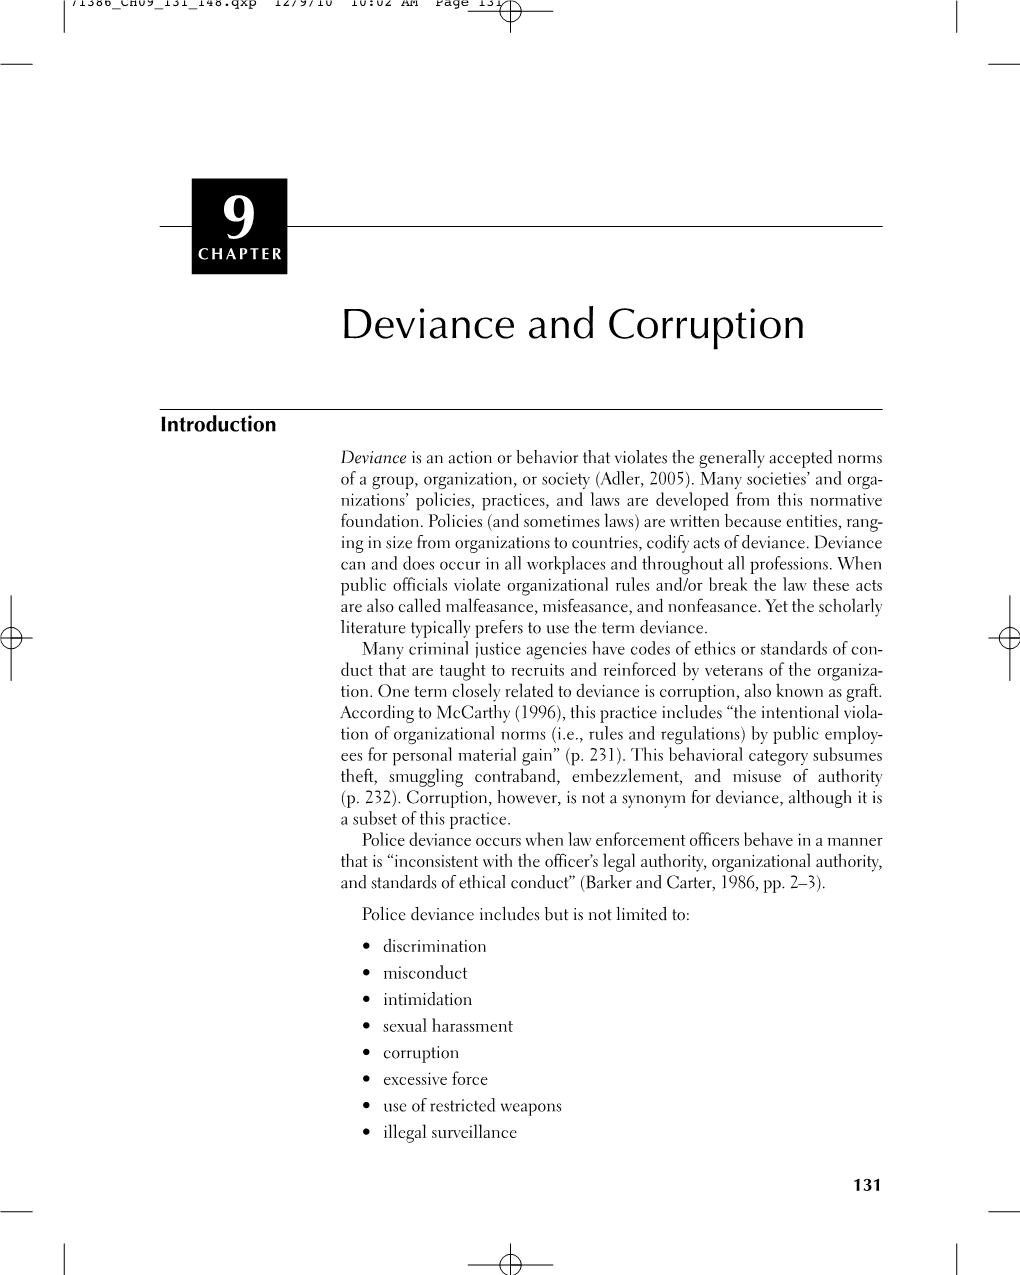 Chapter 9 Deviance and Corruption